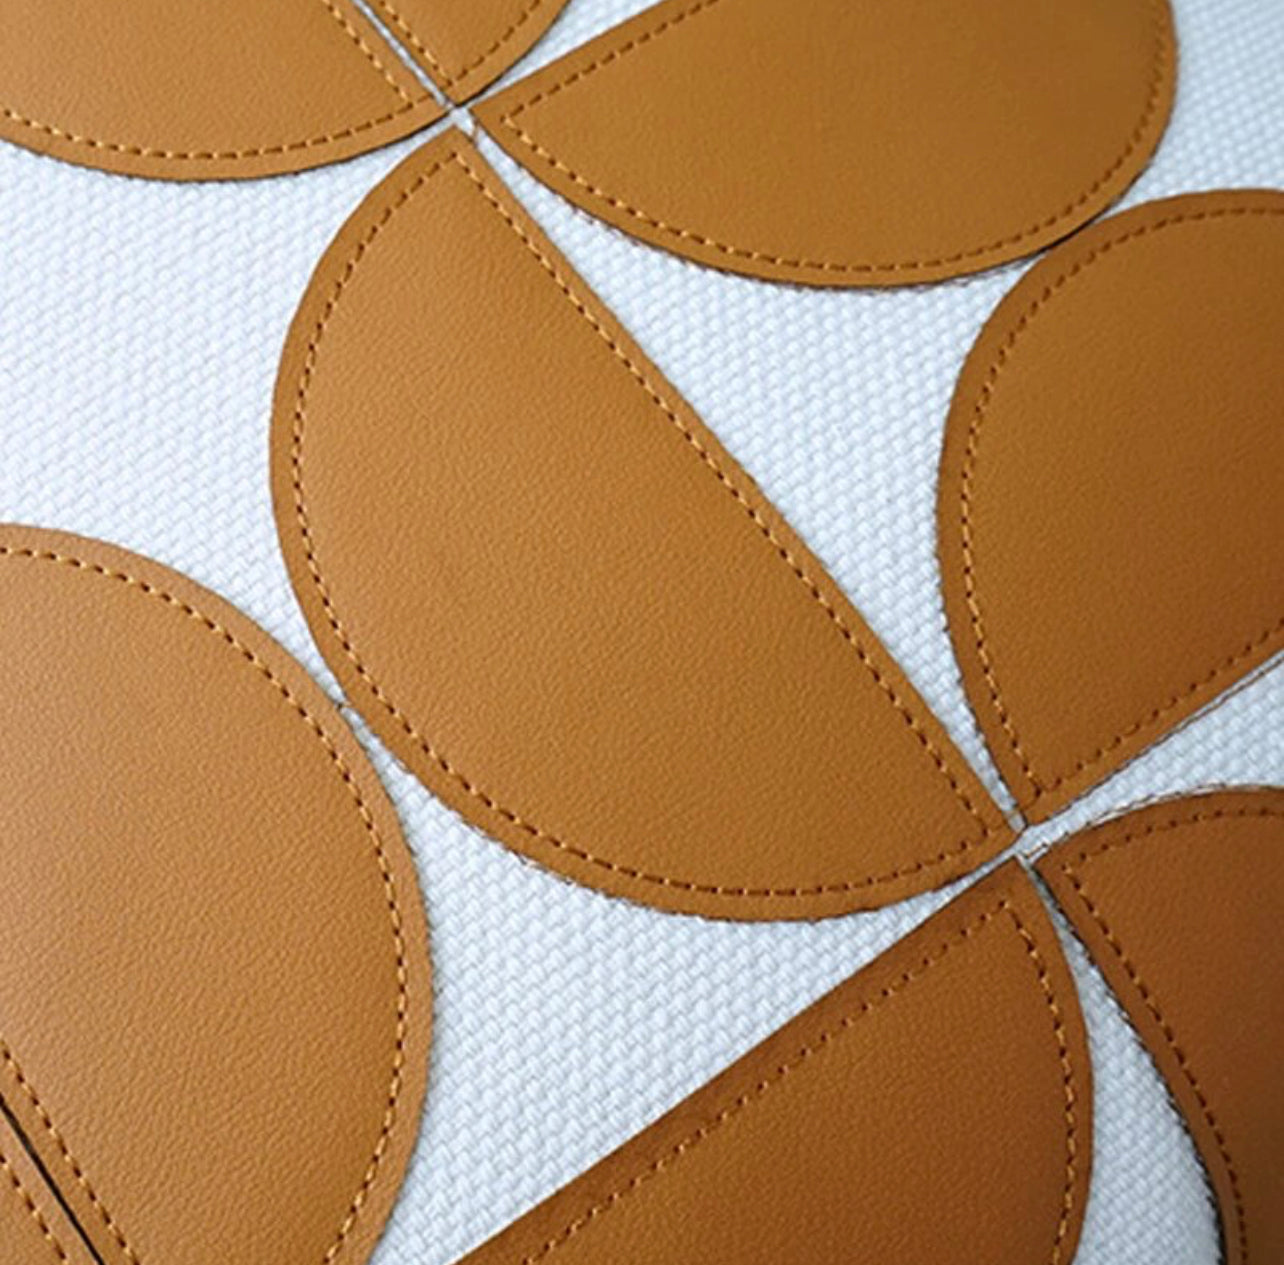 Orange Leather Patch Cushion Cover